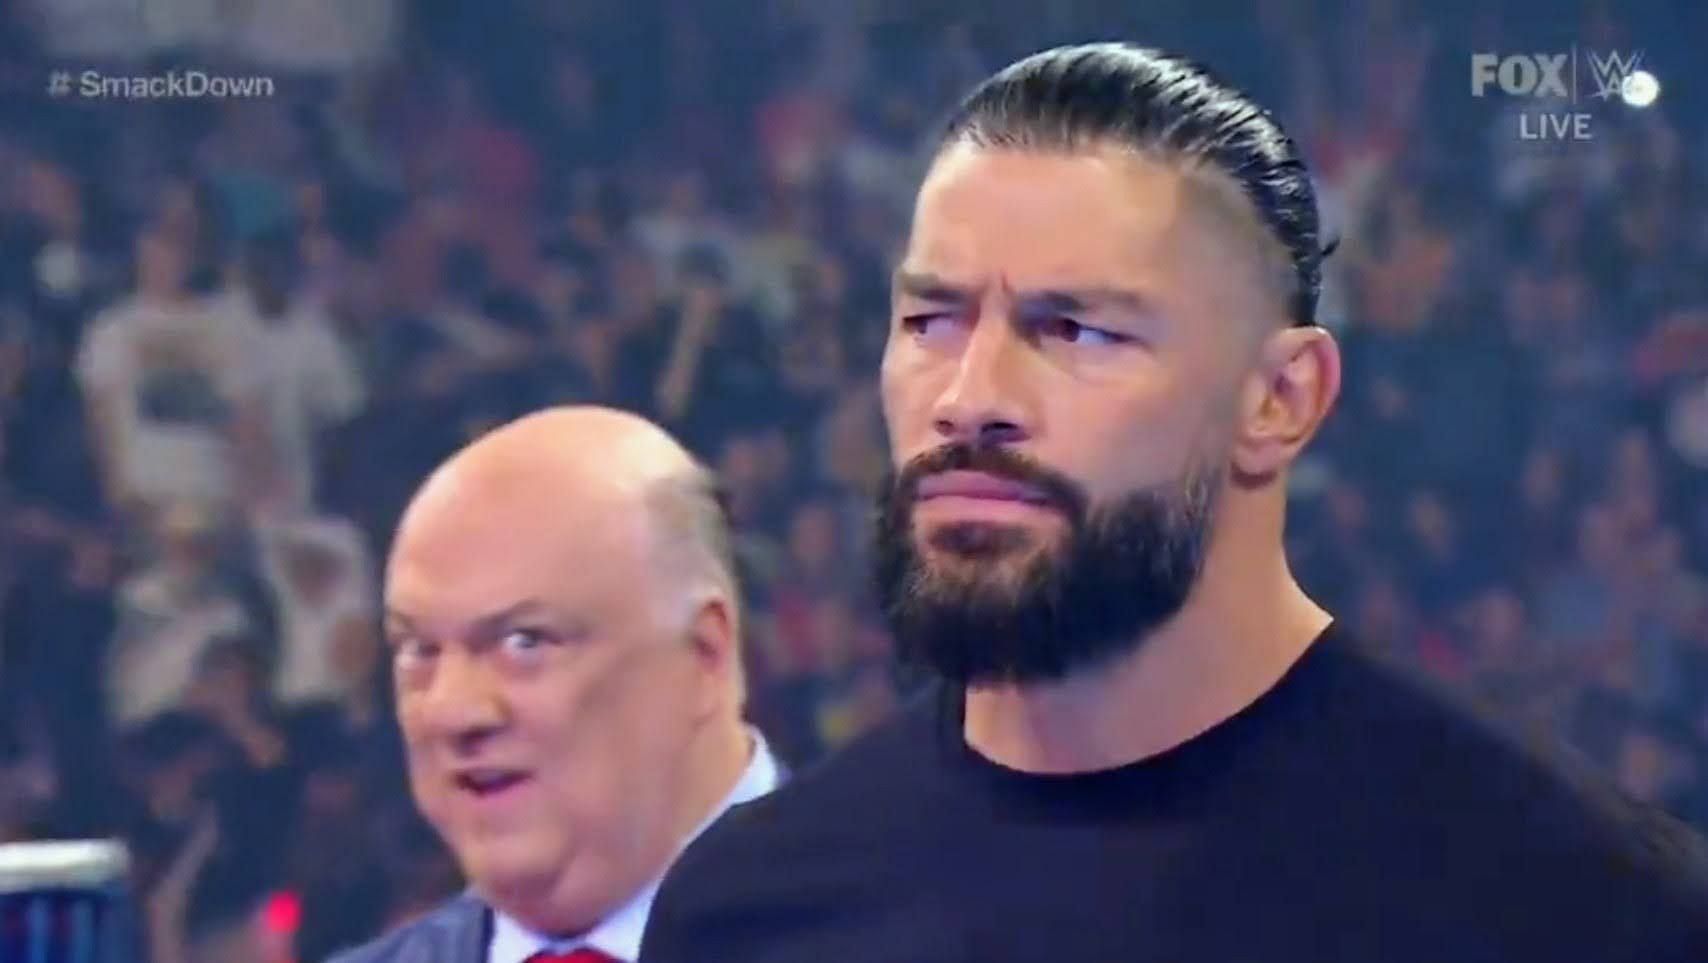 Paul Heyman (left) and Roman Reigns (right) in WWE